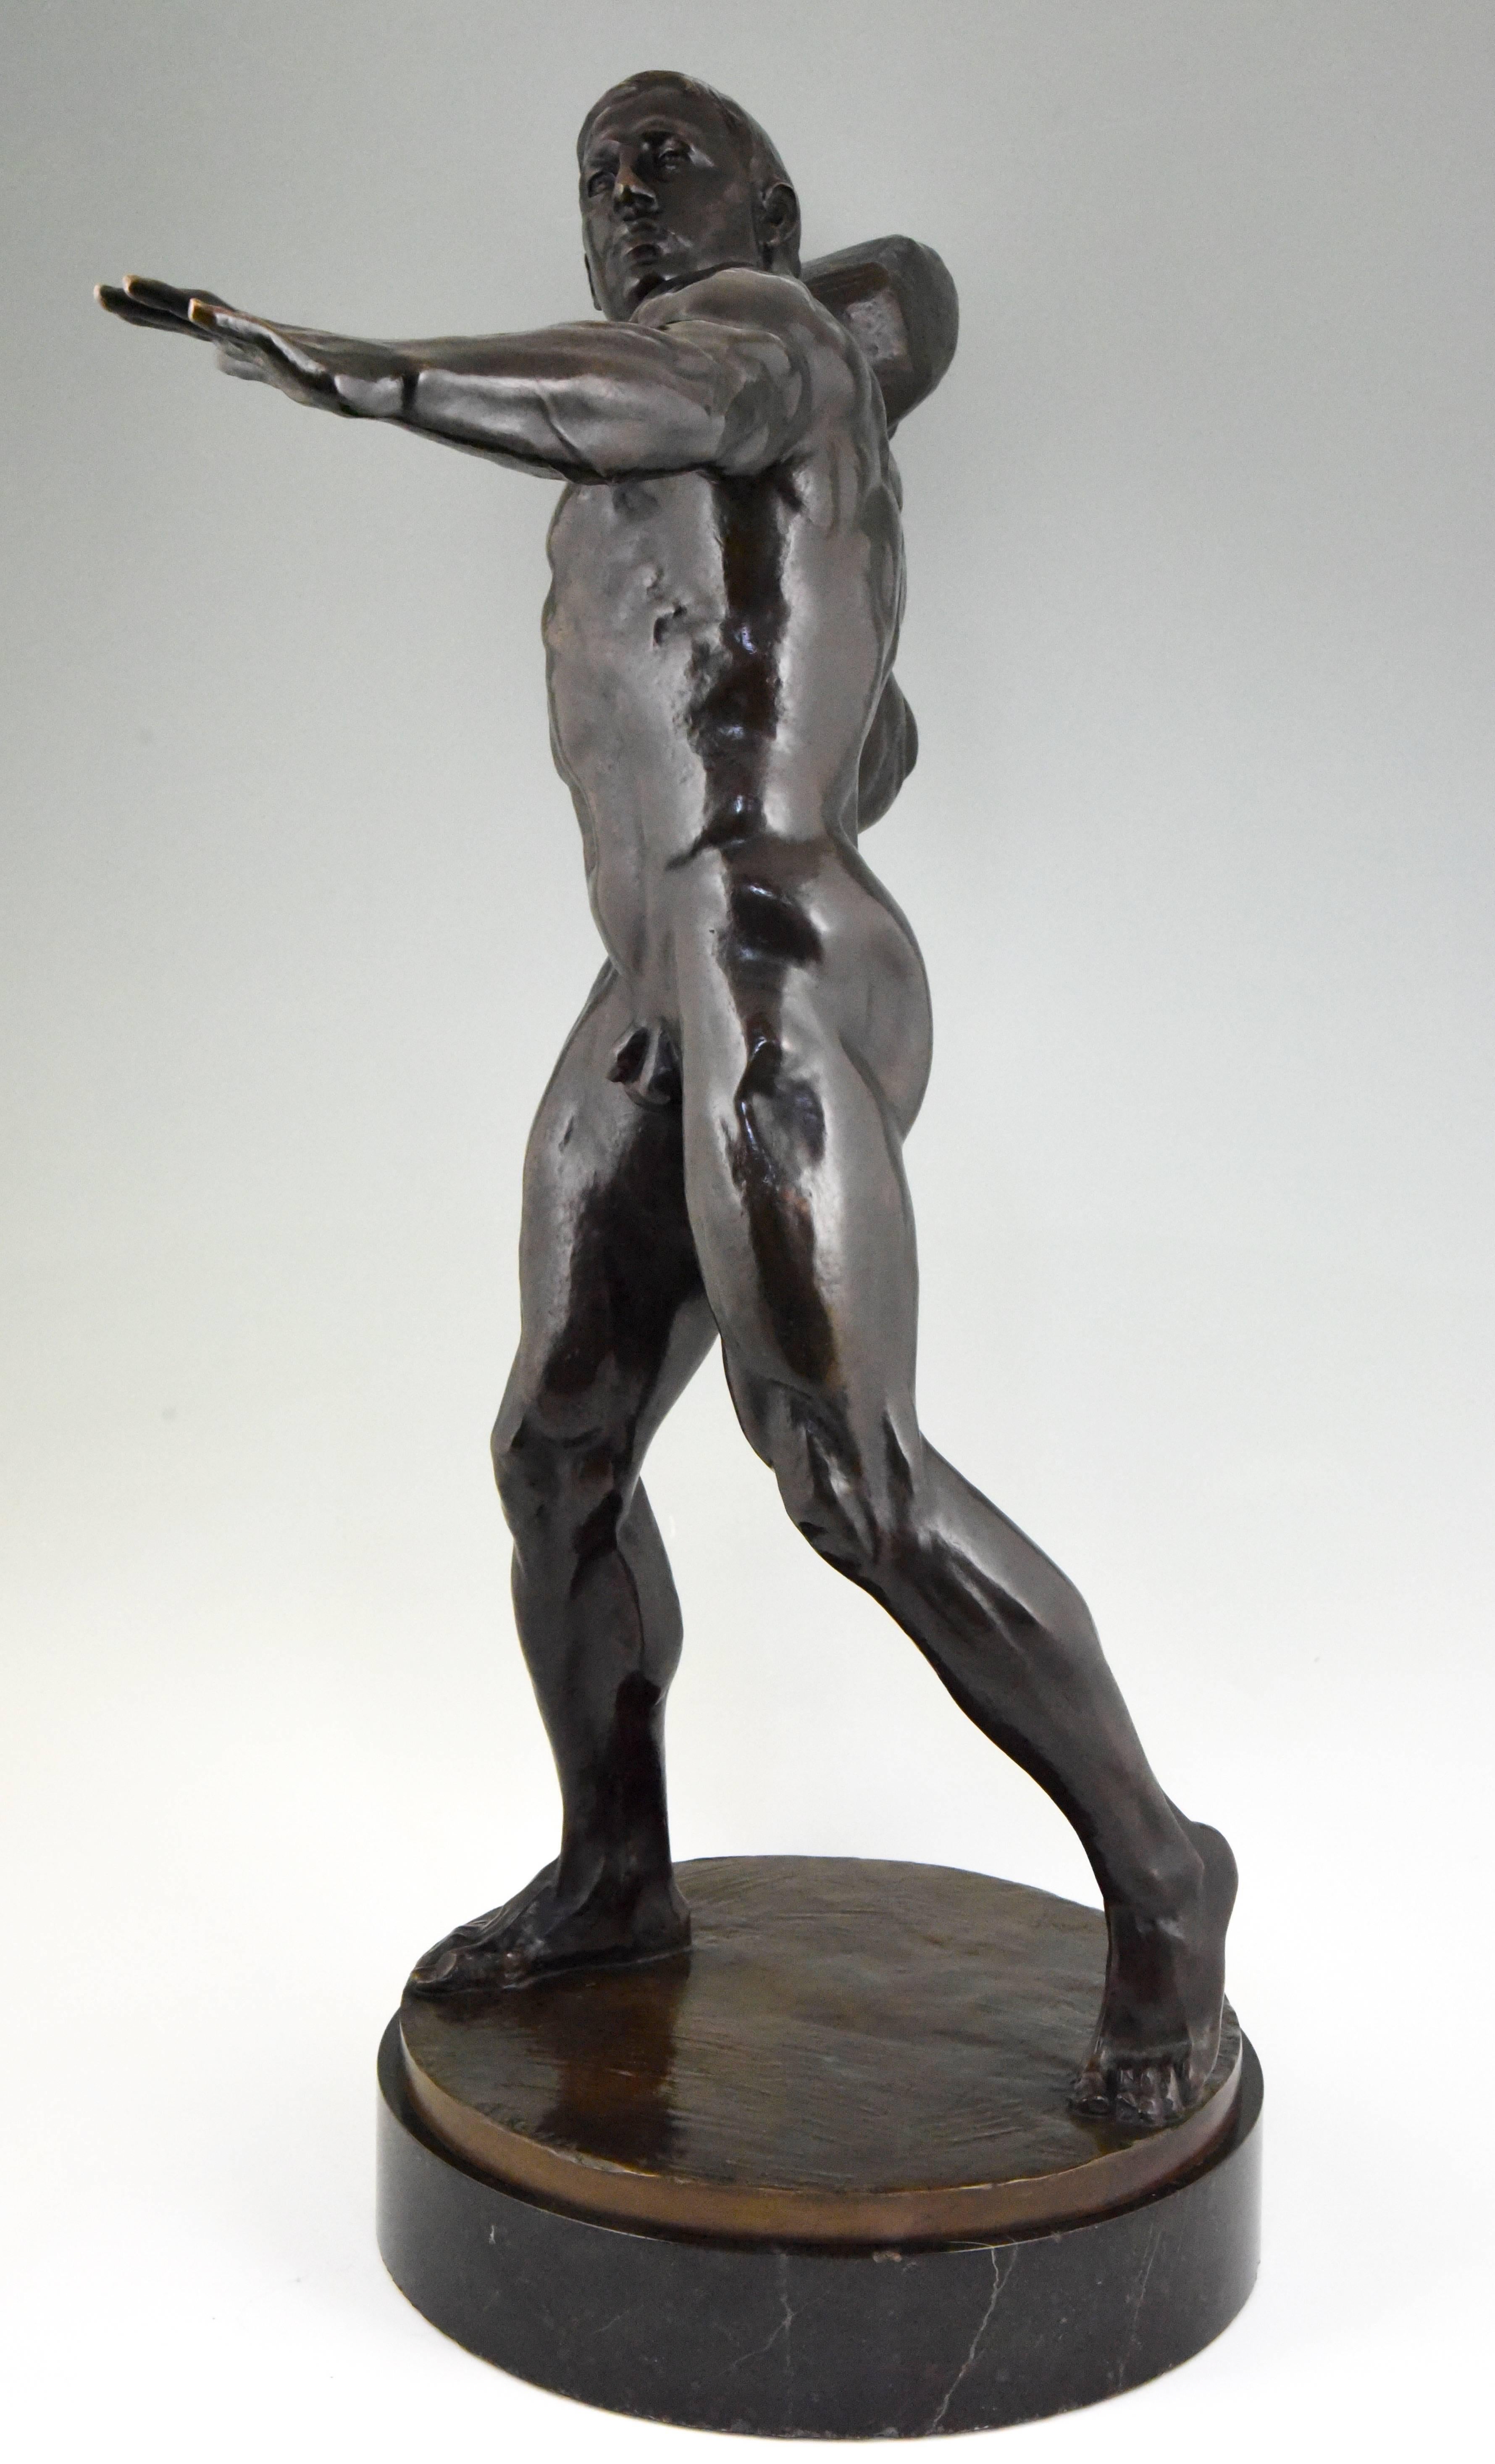 Description Impressive Antique sculpture of a male nude throwing a stone by the Swiss artist Hugo Siegwart (1865-1938) He worked in Germany and France. 
Artist/ Maker: Hugo Siegwart.
Signature/ Marks: Hugo Siegwart
Date: 1900. 
Material: Bronze on